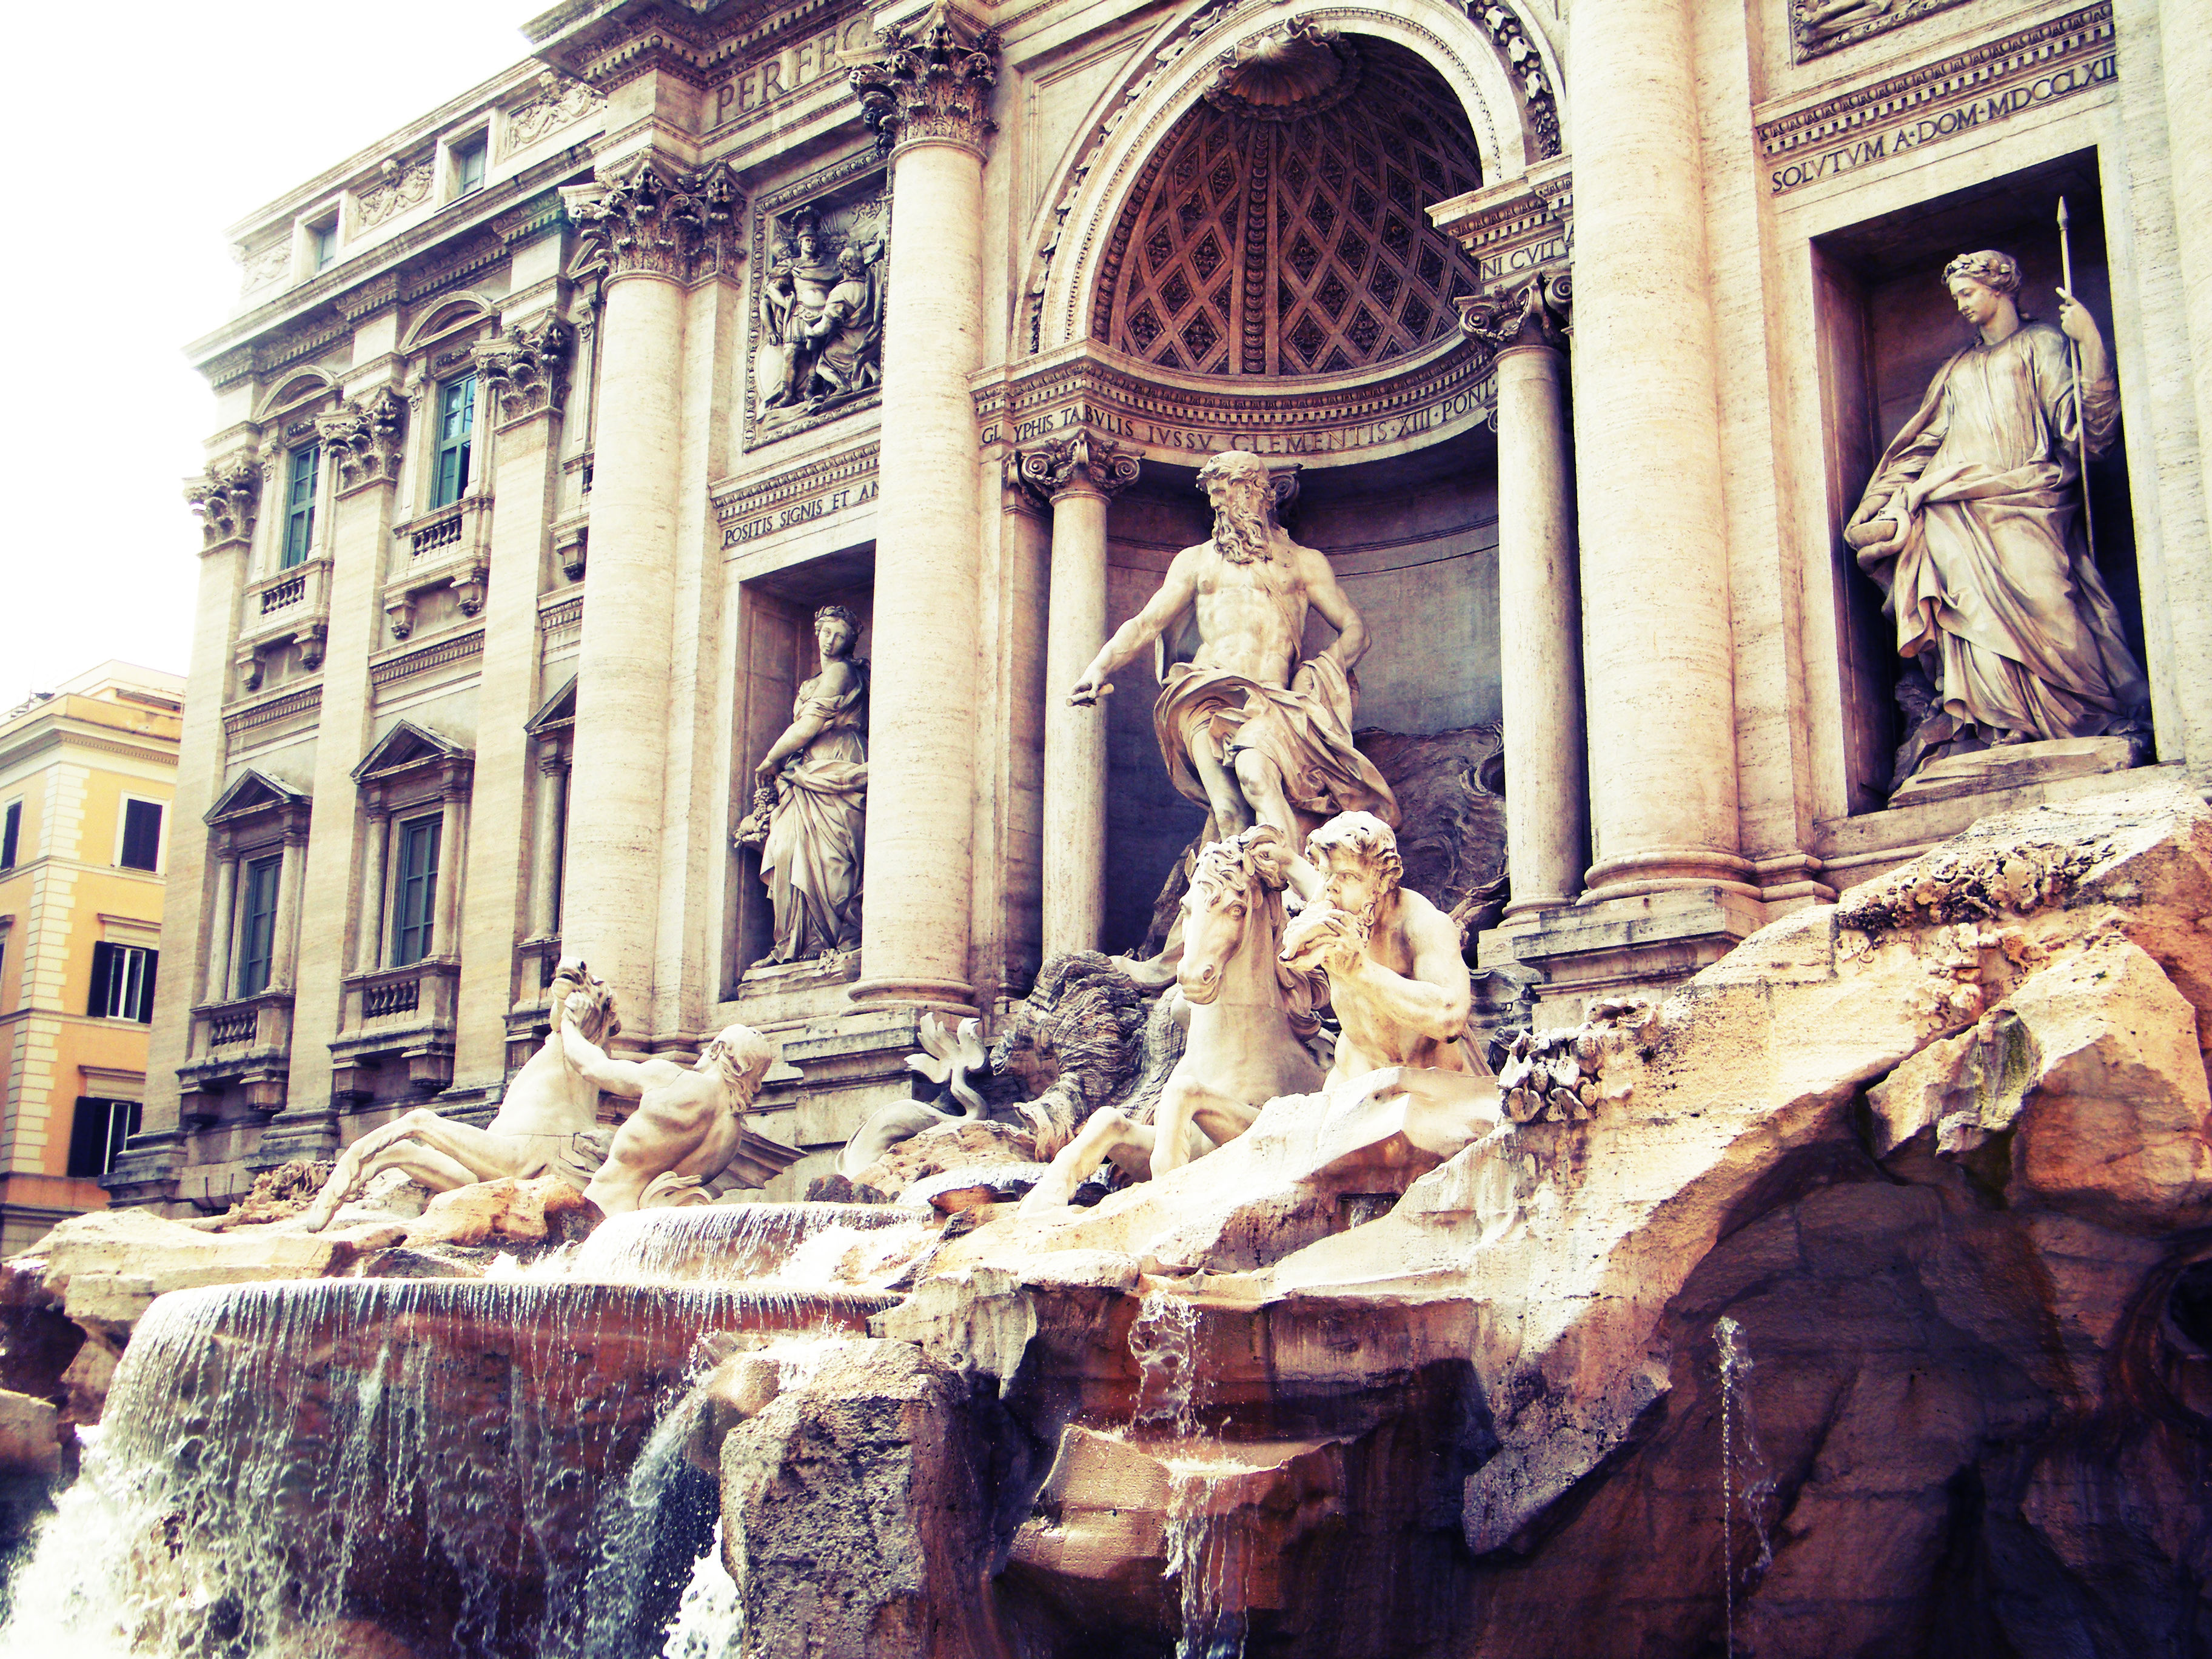 Trevi Fountain in Rome by Dialicia on DeviantArt